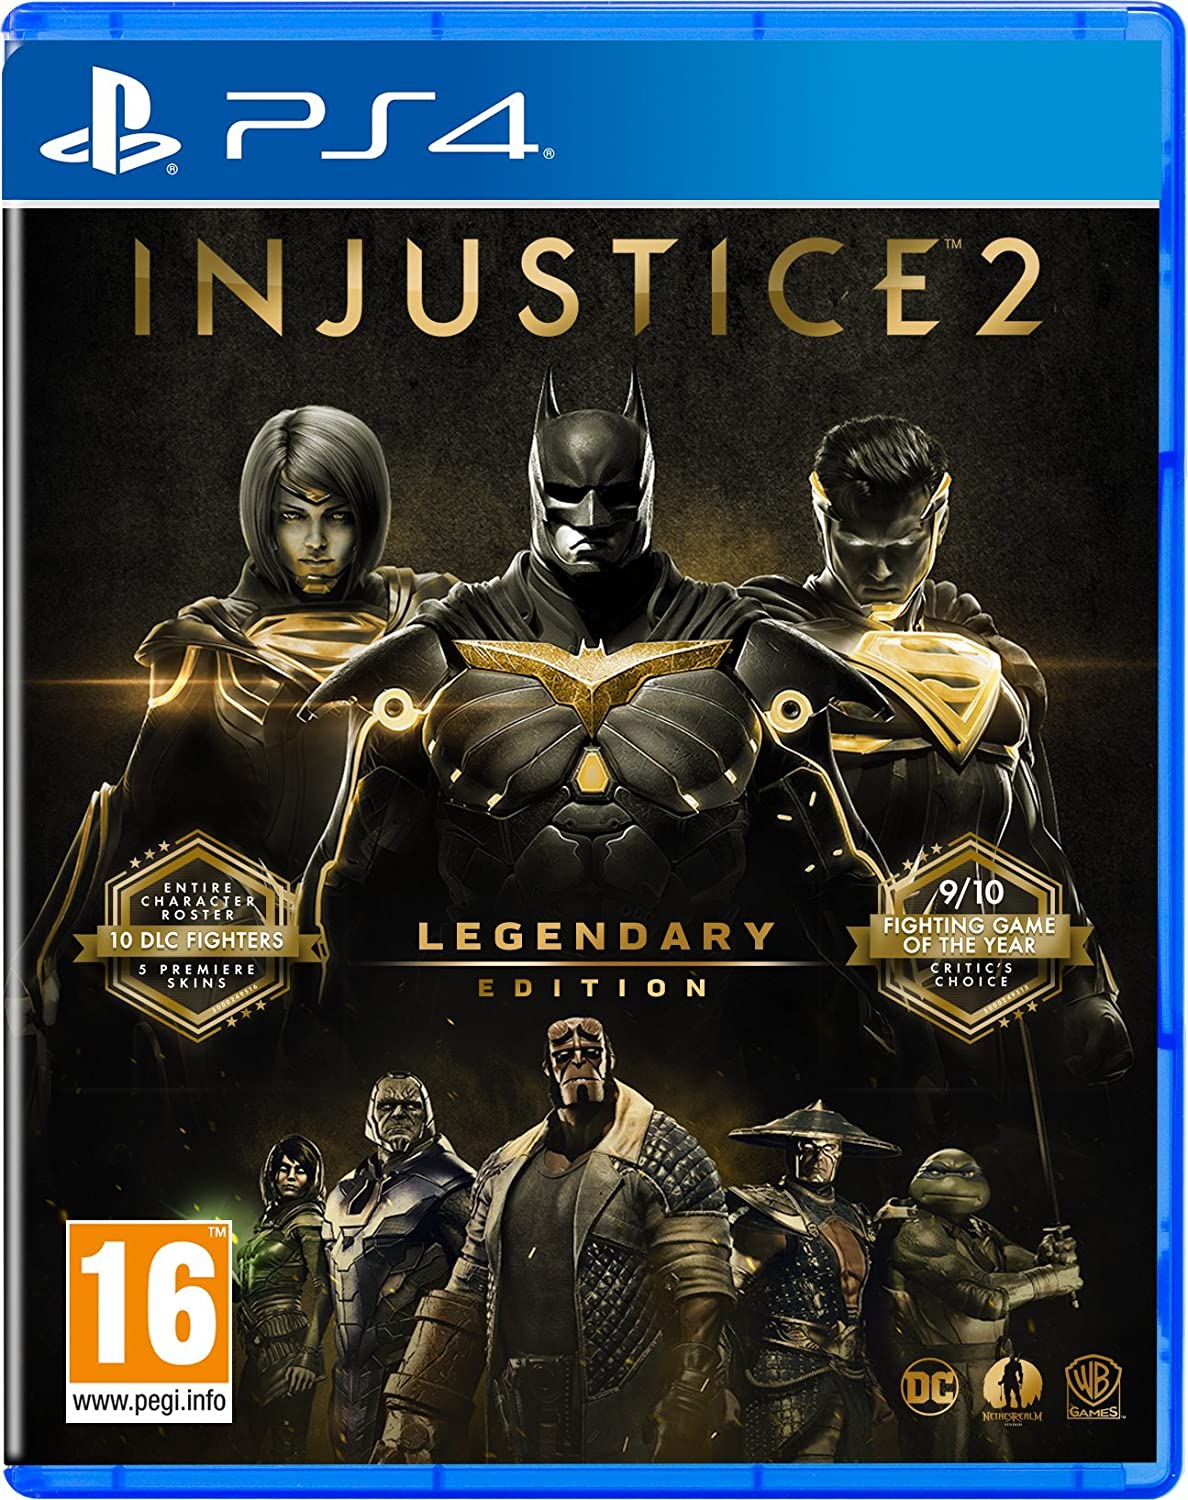 Injustice 2: Legendary Edition Video Game (PS4)